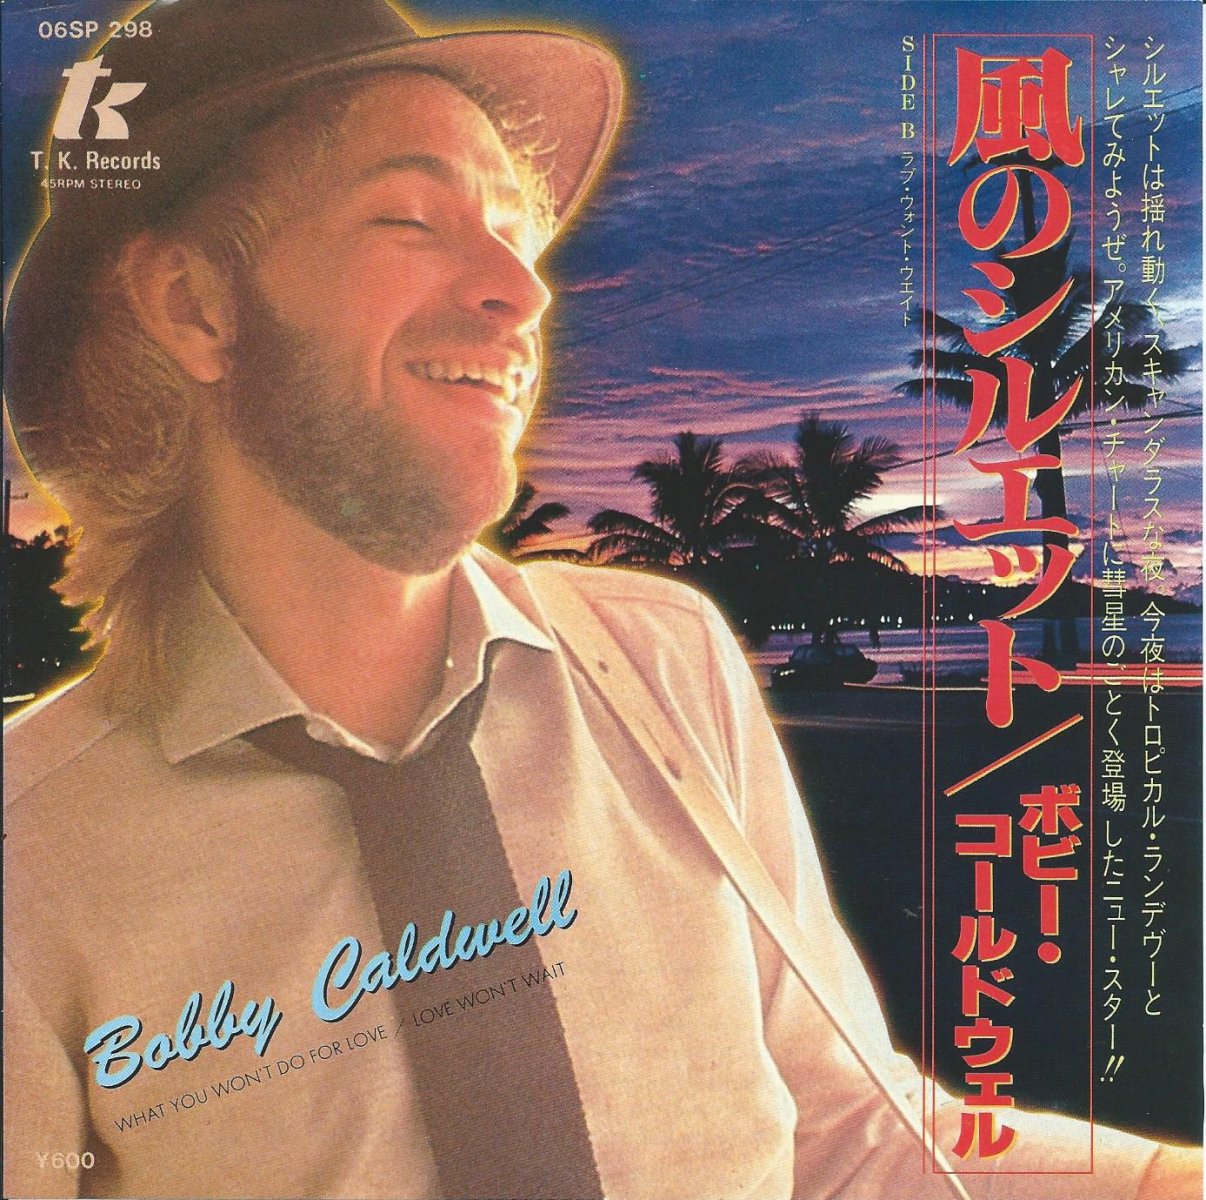 BOBBY CALDWELL / WHAT YOU WON'T DO FOR LOVE (7